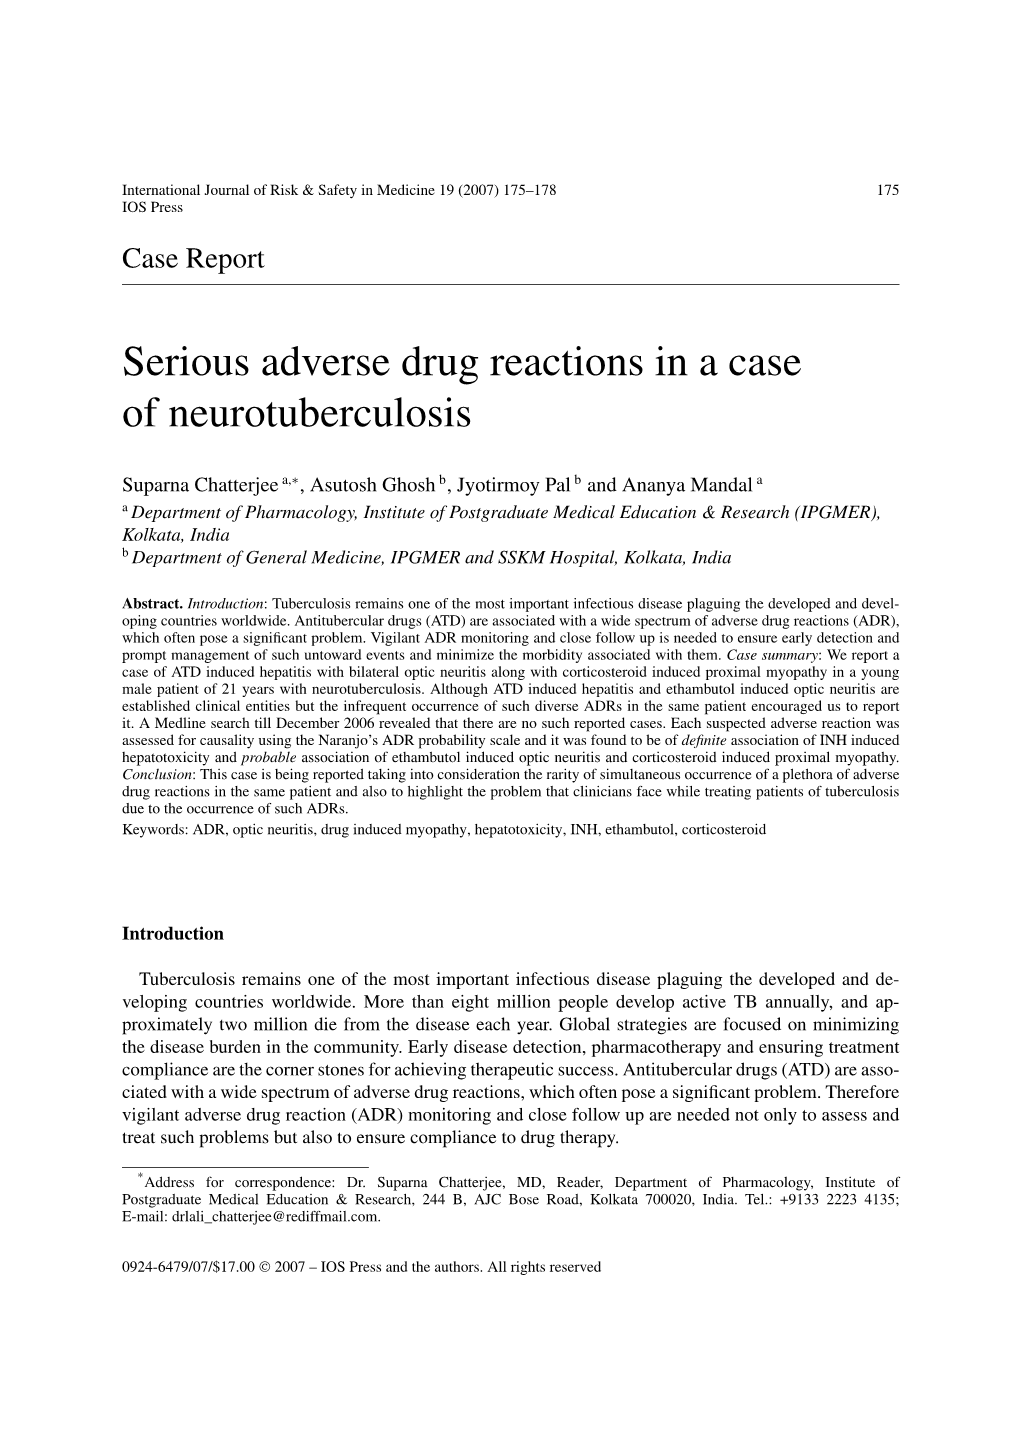 Serious Adverse Drug Reactions in a Case of Neurotuberculosis